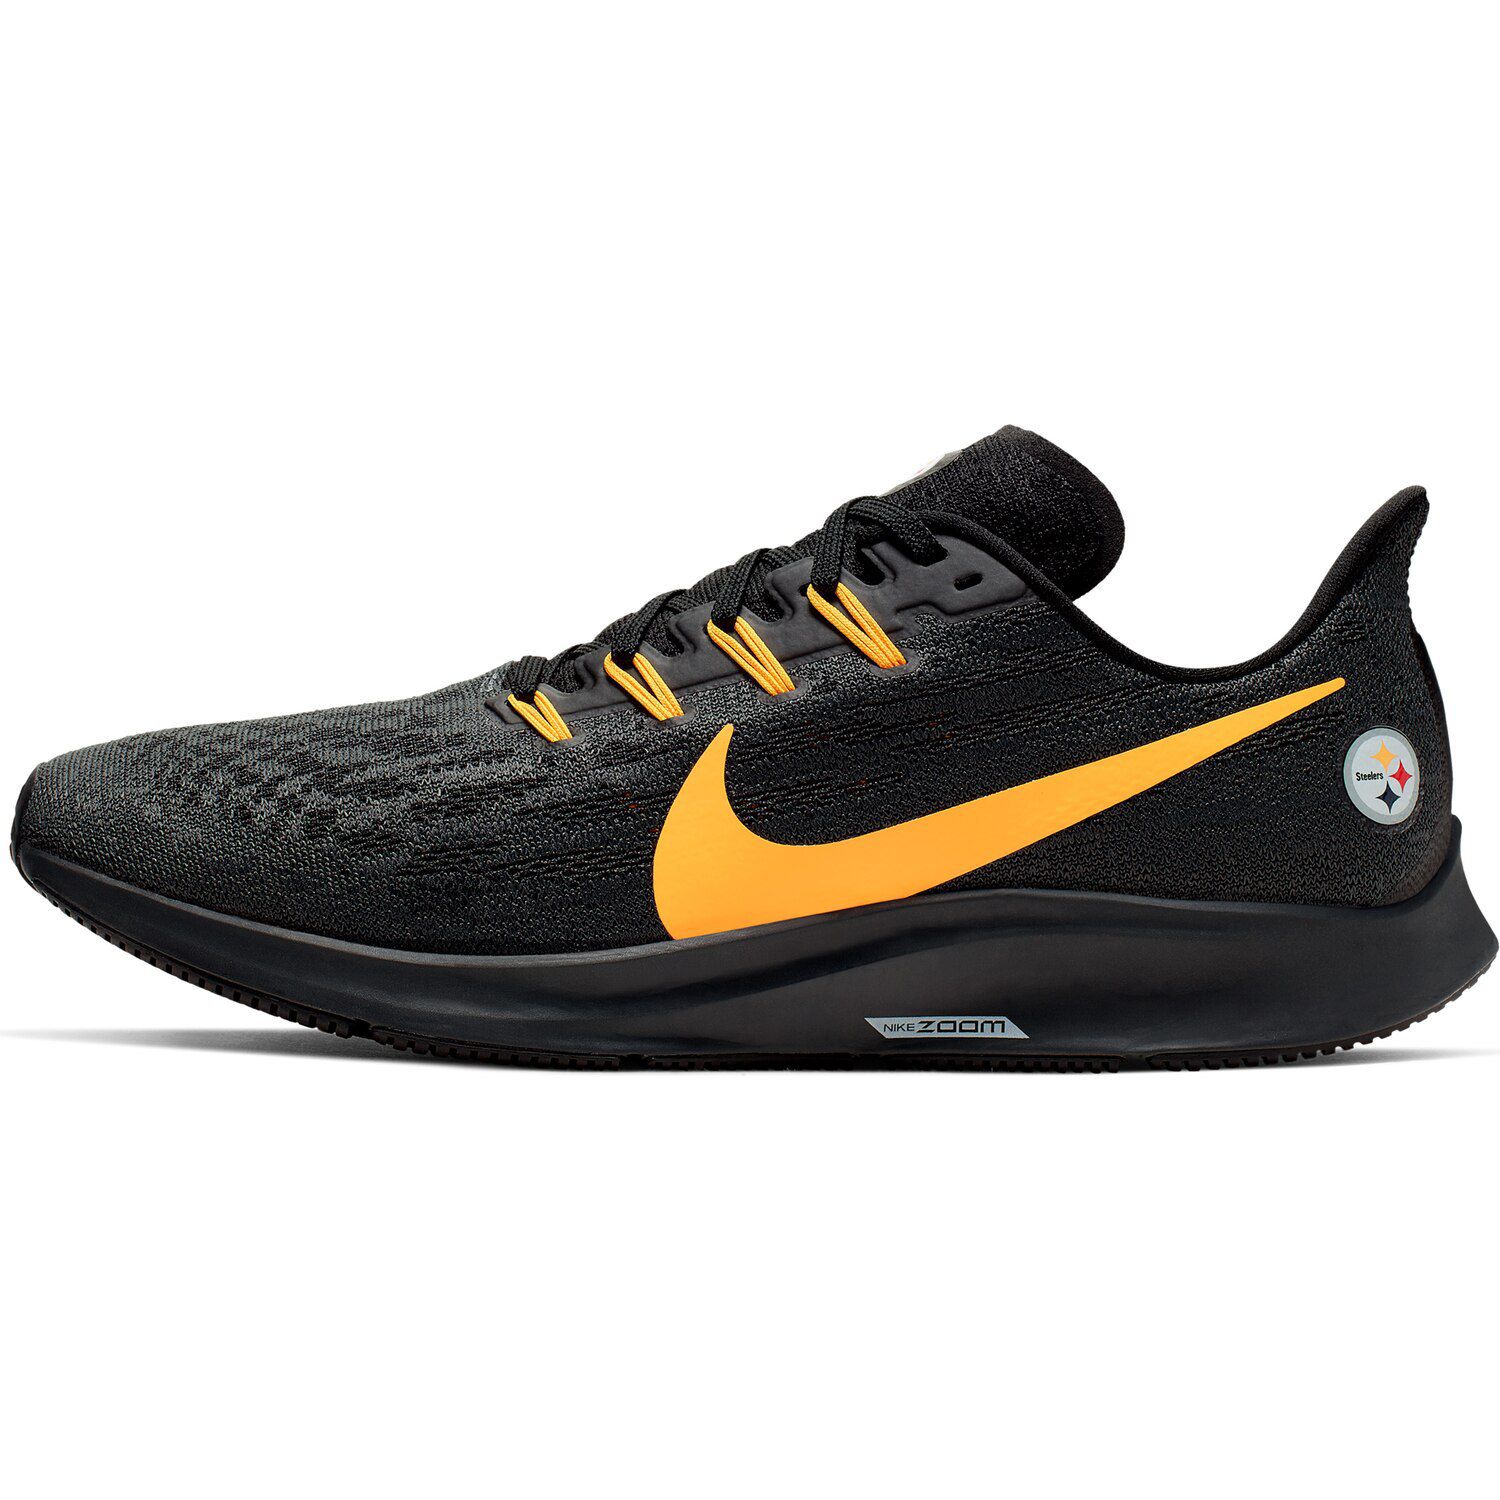 Men's Nike Anthracite/Gold Pittsburgh 